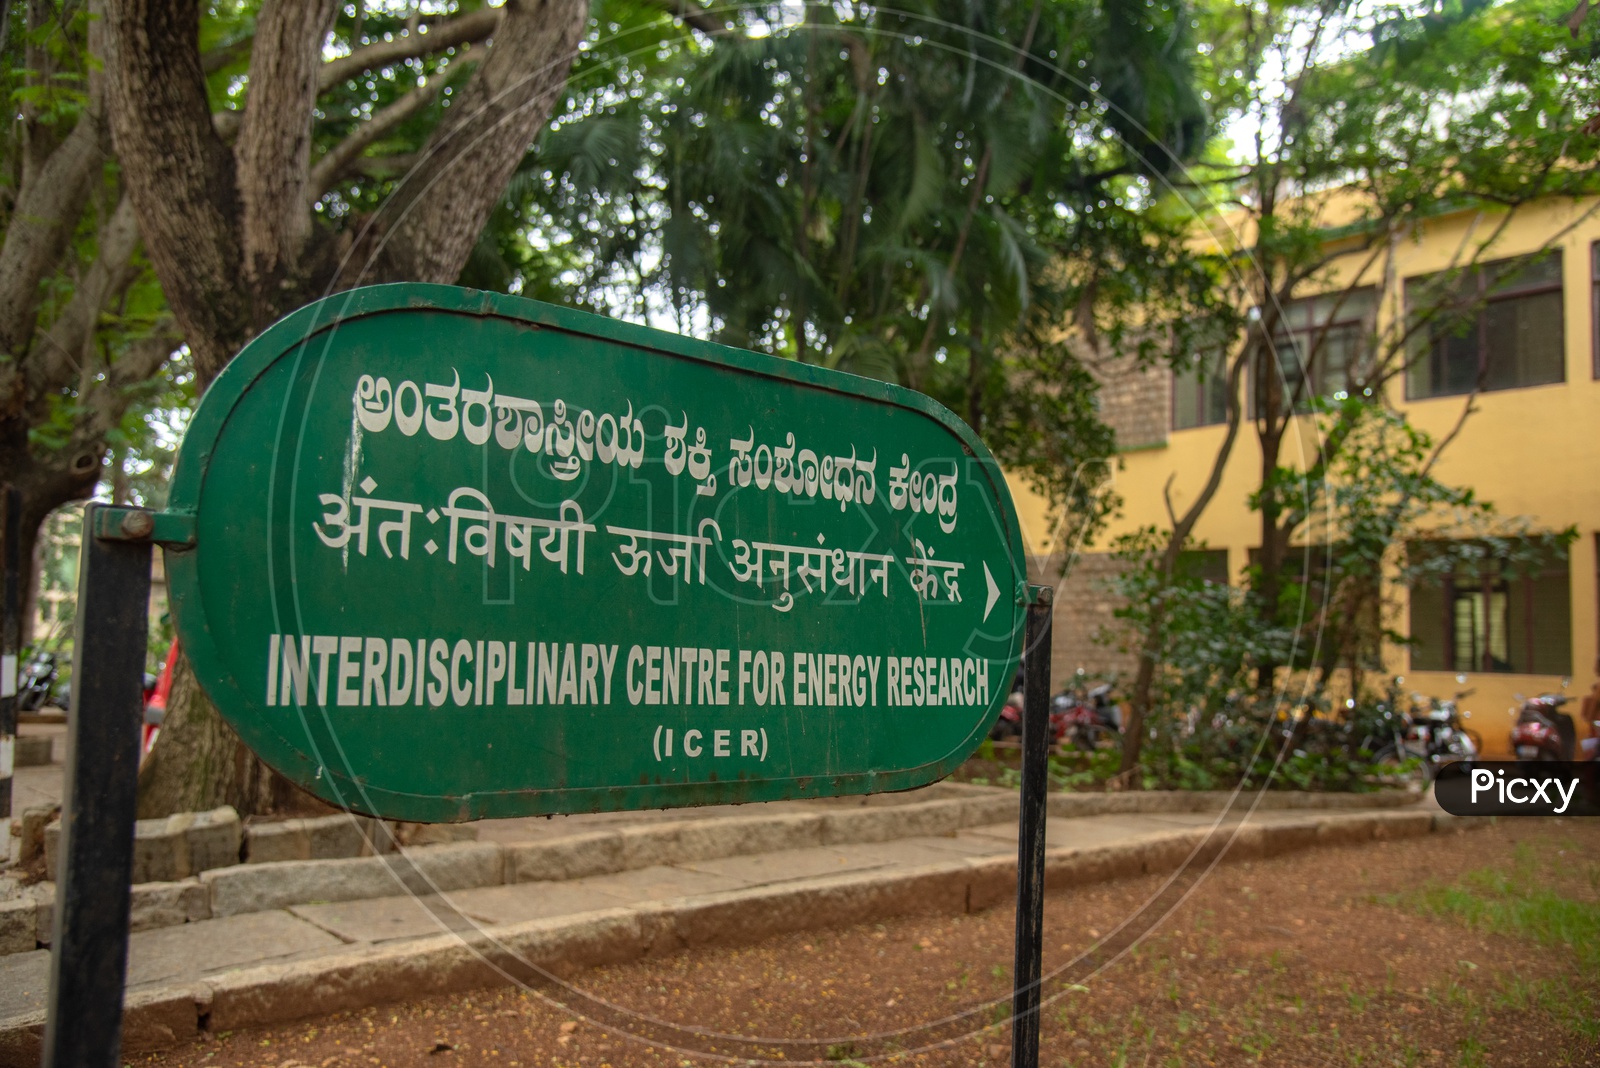 Interdisciplinary centre for Energy research, ICER in  Indian Institute of Science, Bangalore